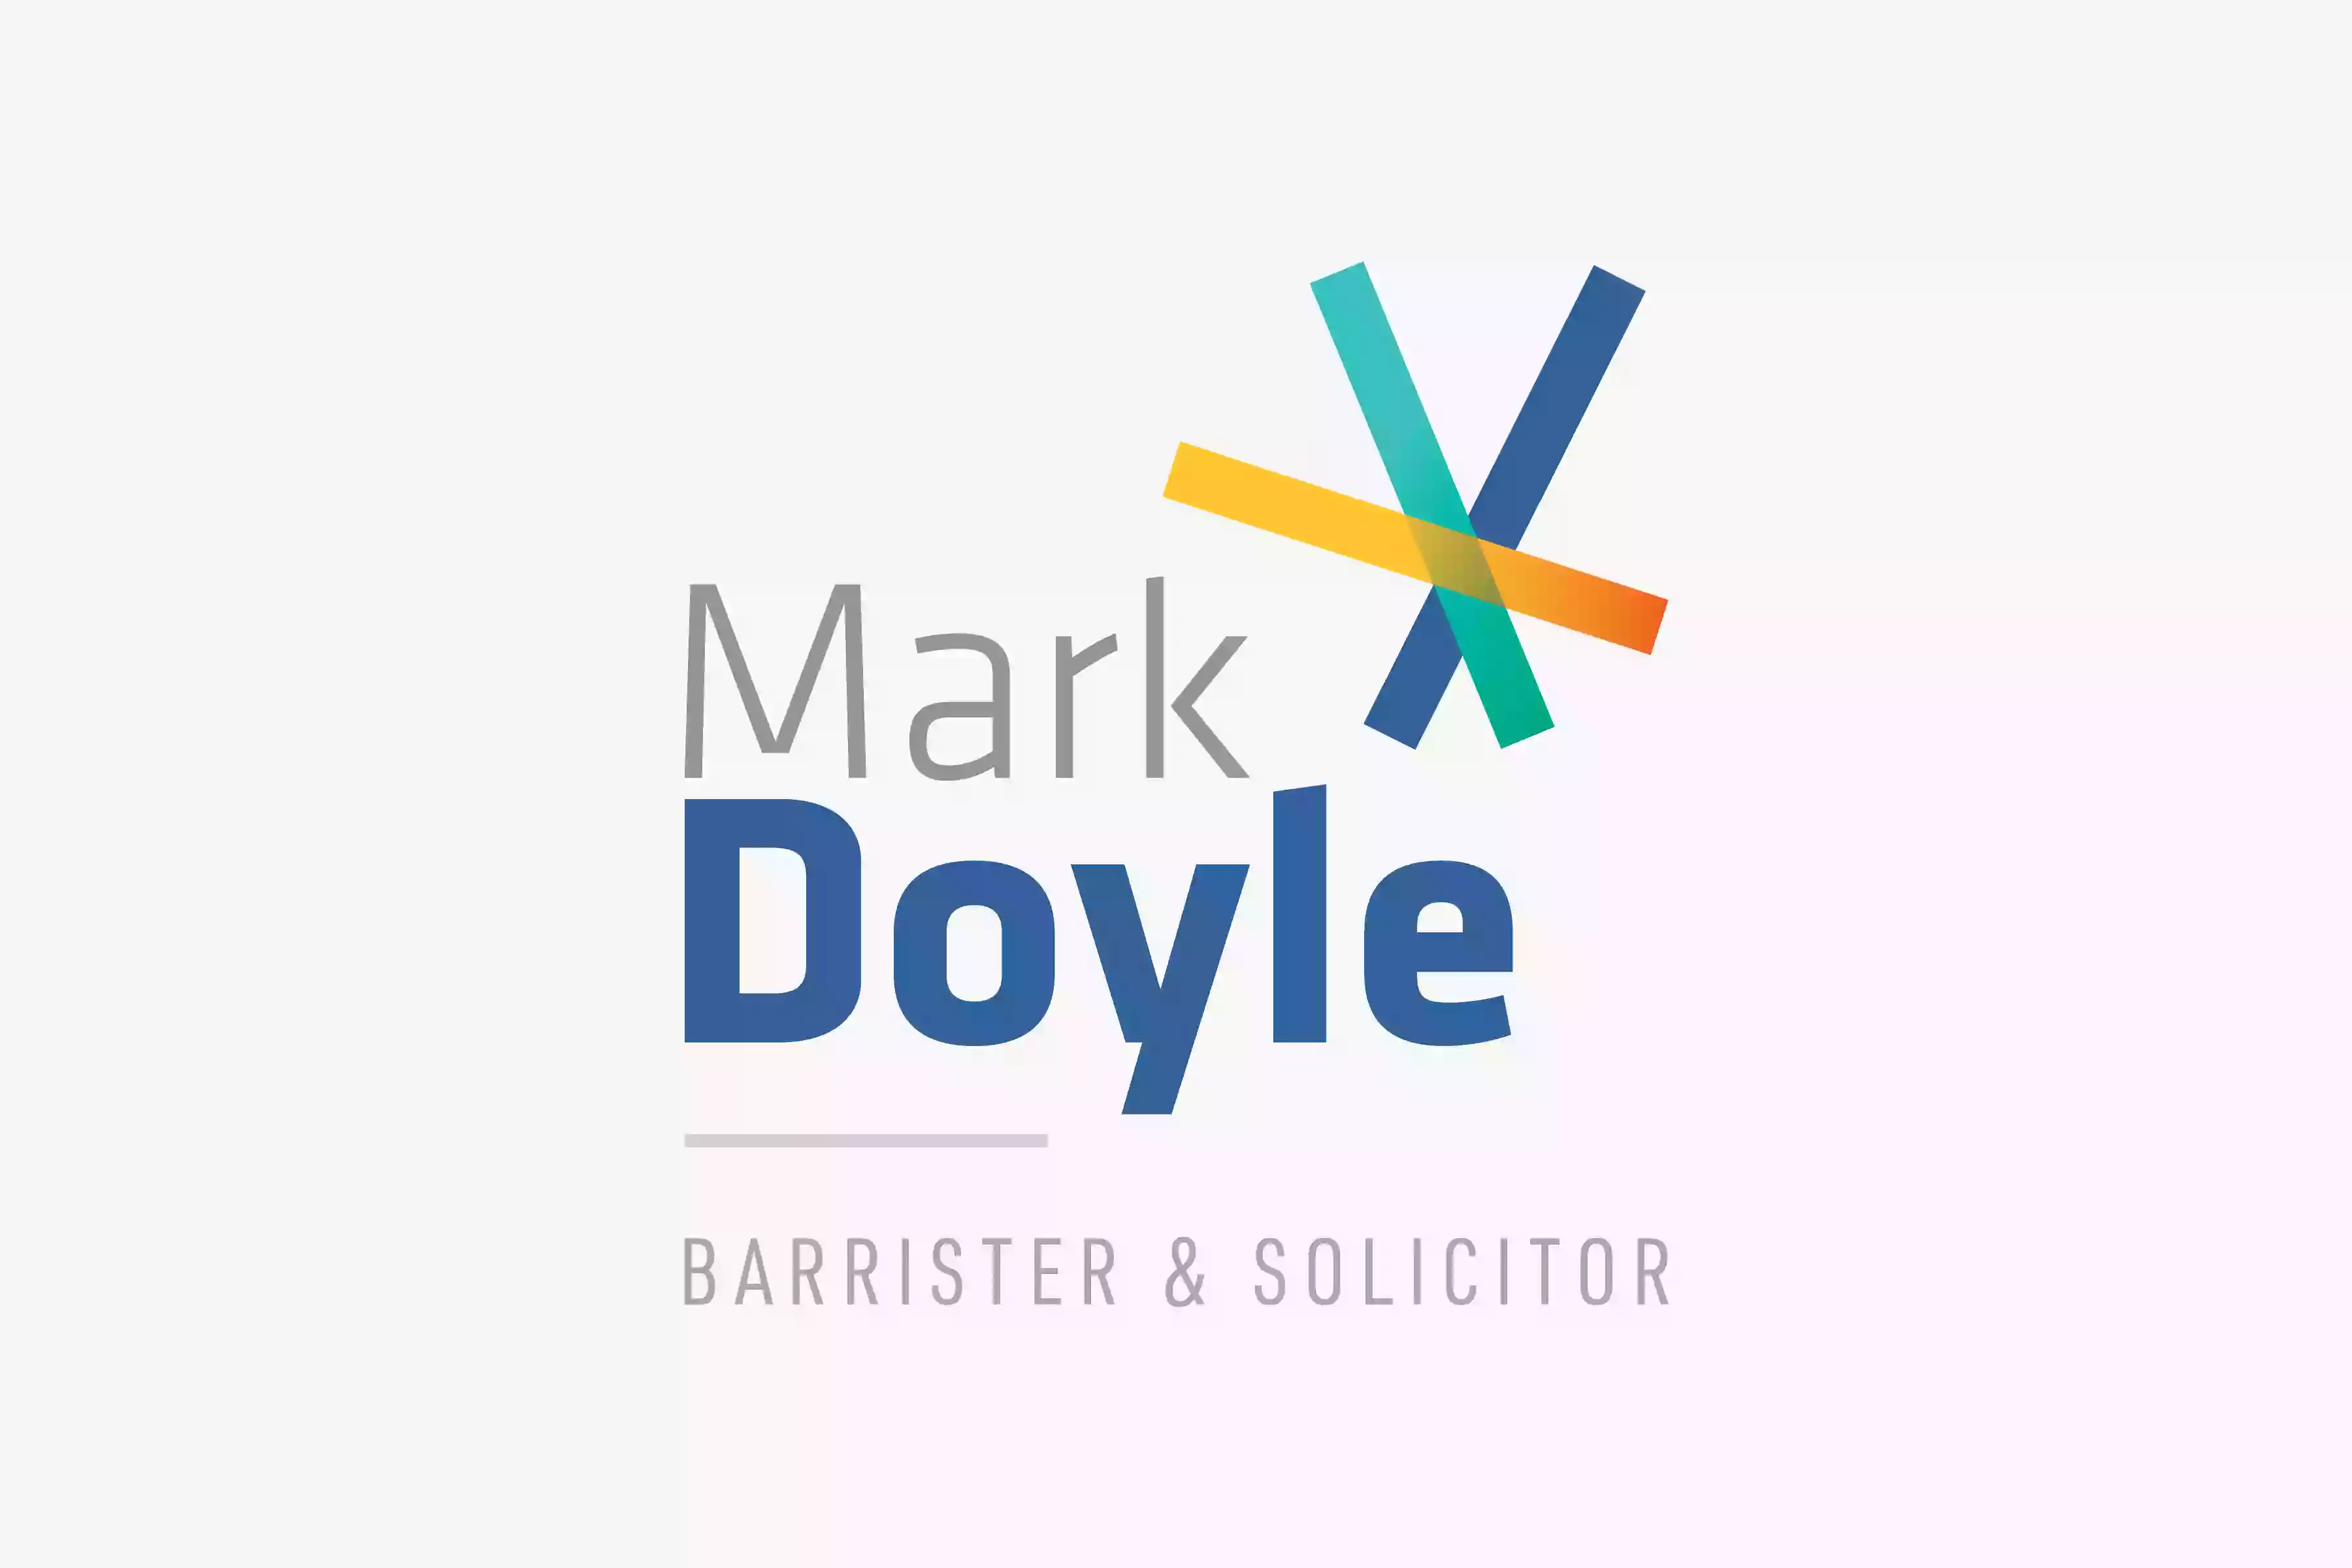 Mark Doyle, Barrister & Solicitor